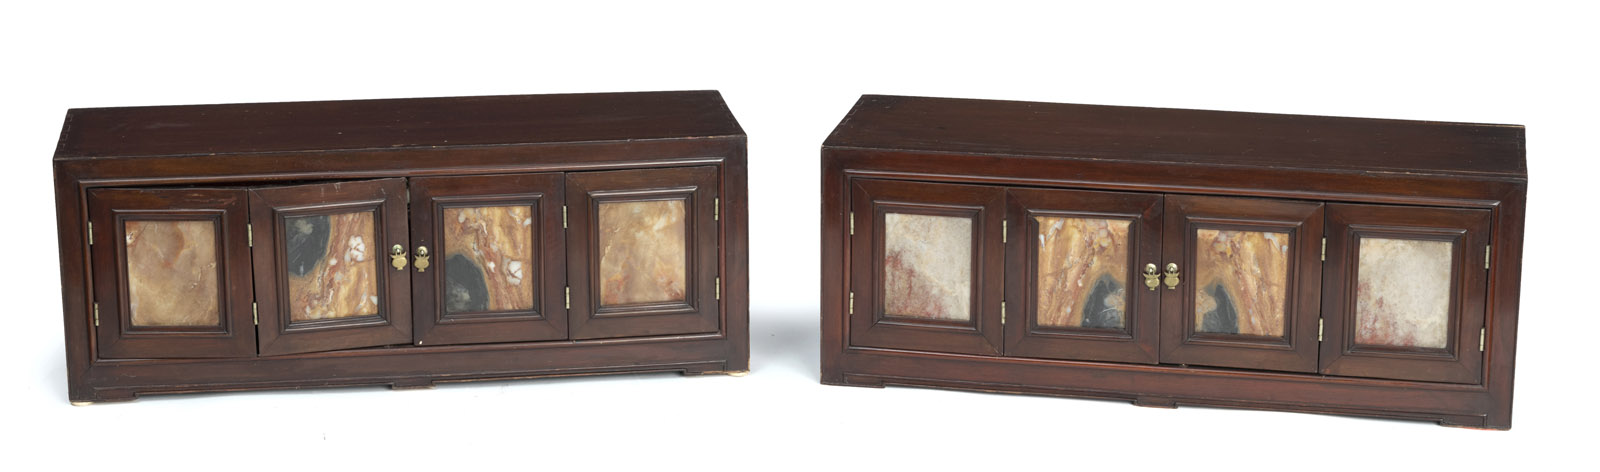 <b>A PAIR OF FLAT WOODEN CUPBOARDS (MUNGAB), EACH WITH HINGED TWO-PARTS DOORS, INLAID WITH MARBLE PANELS</b>